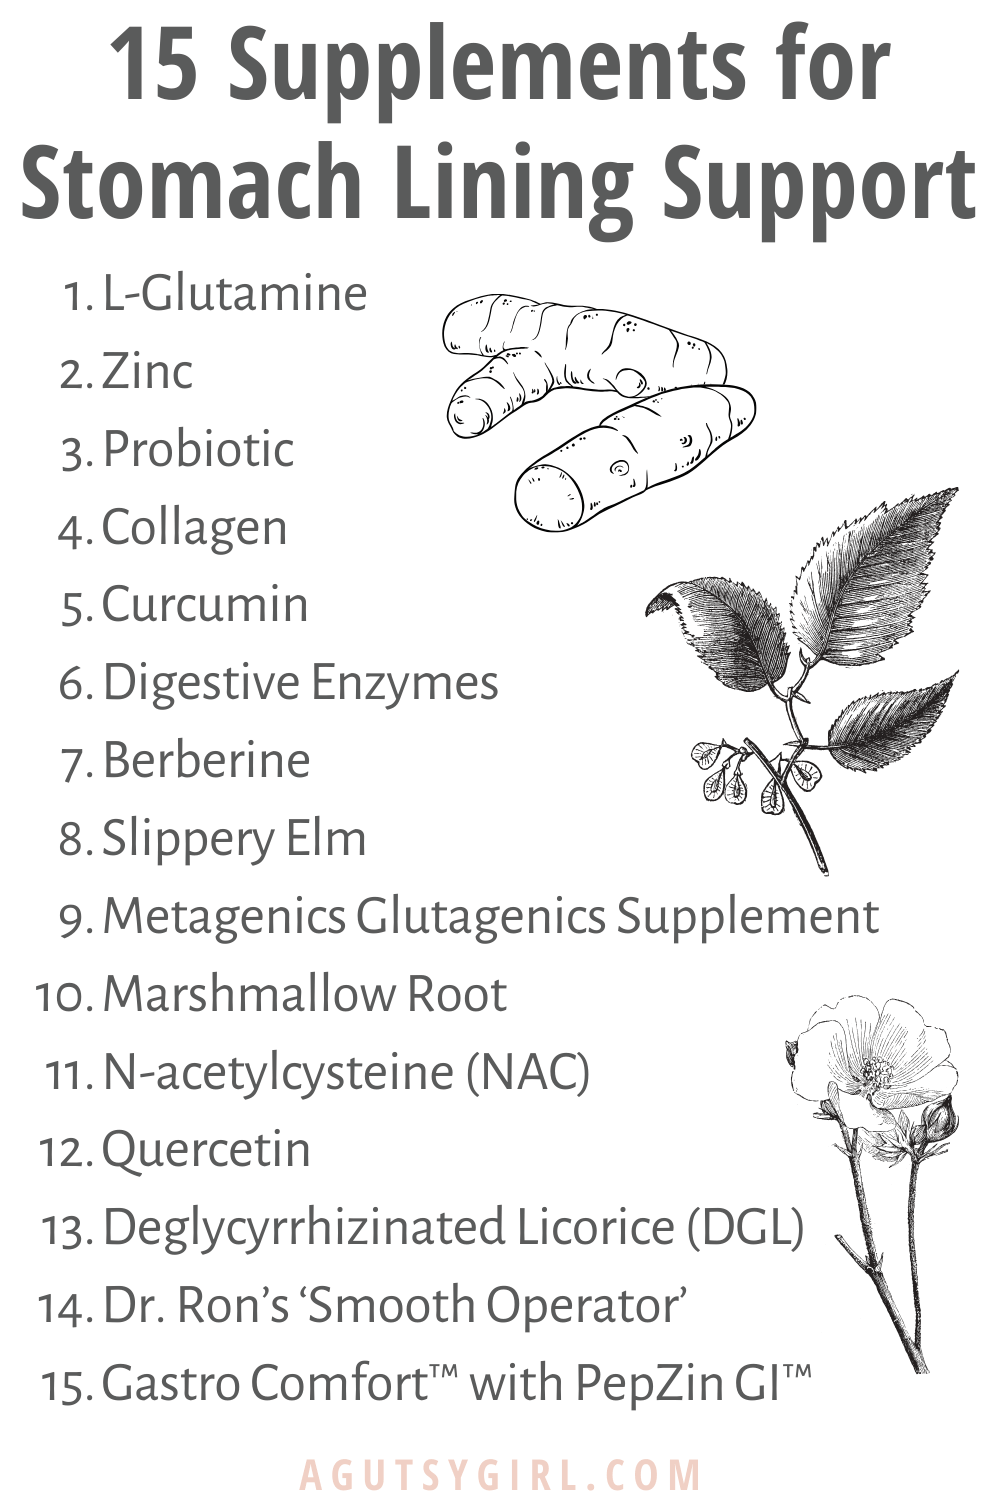 15 Supplements for Stomach Lining Support agutsygirl.com #supplement #supplements #guthealth #healing